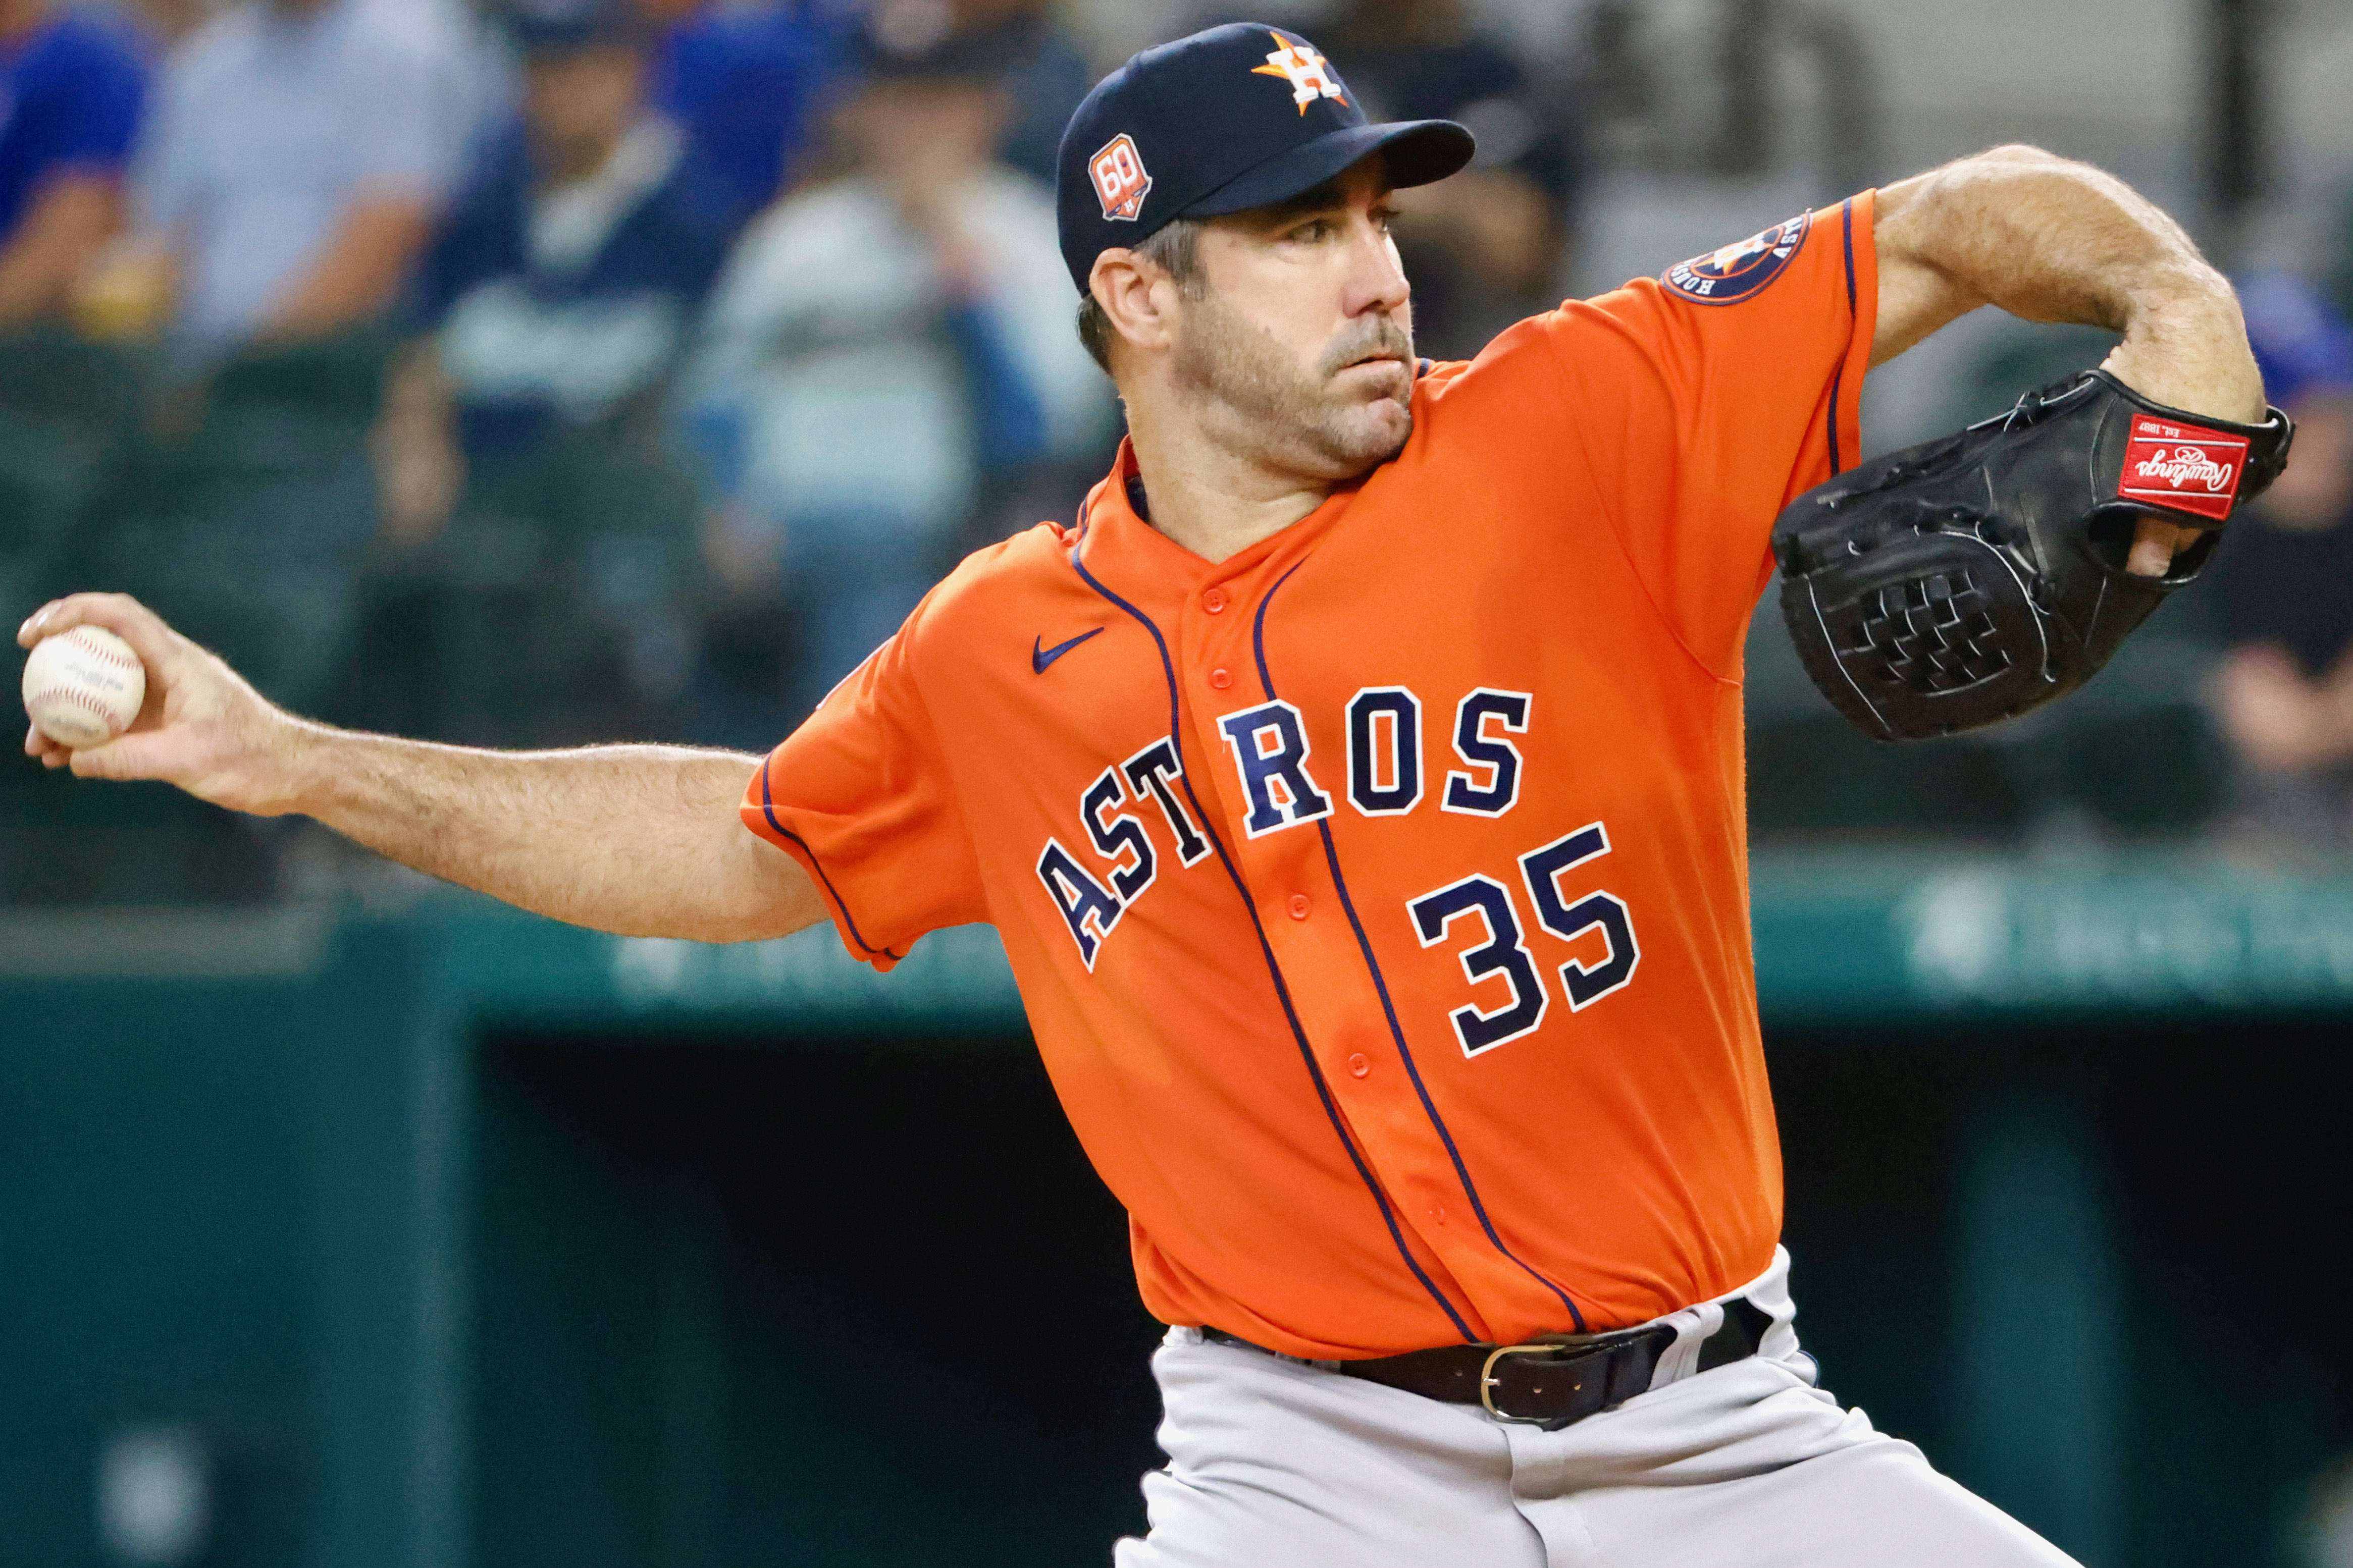 Astros' Justin Verlander exits game early due to calf injury